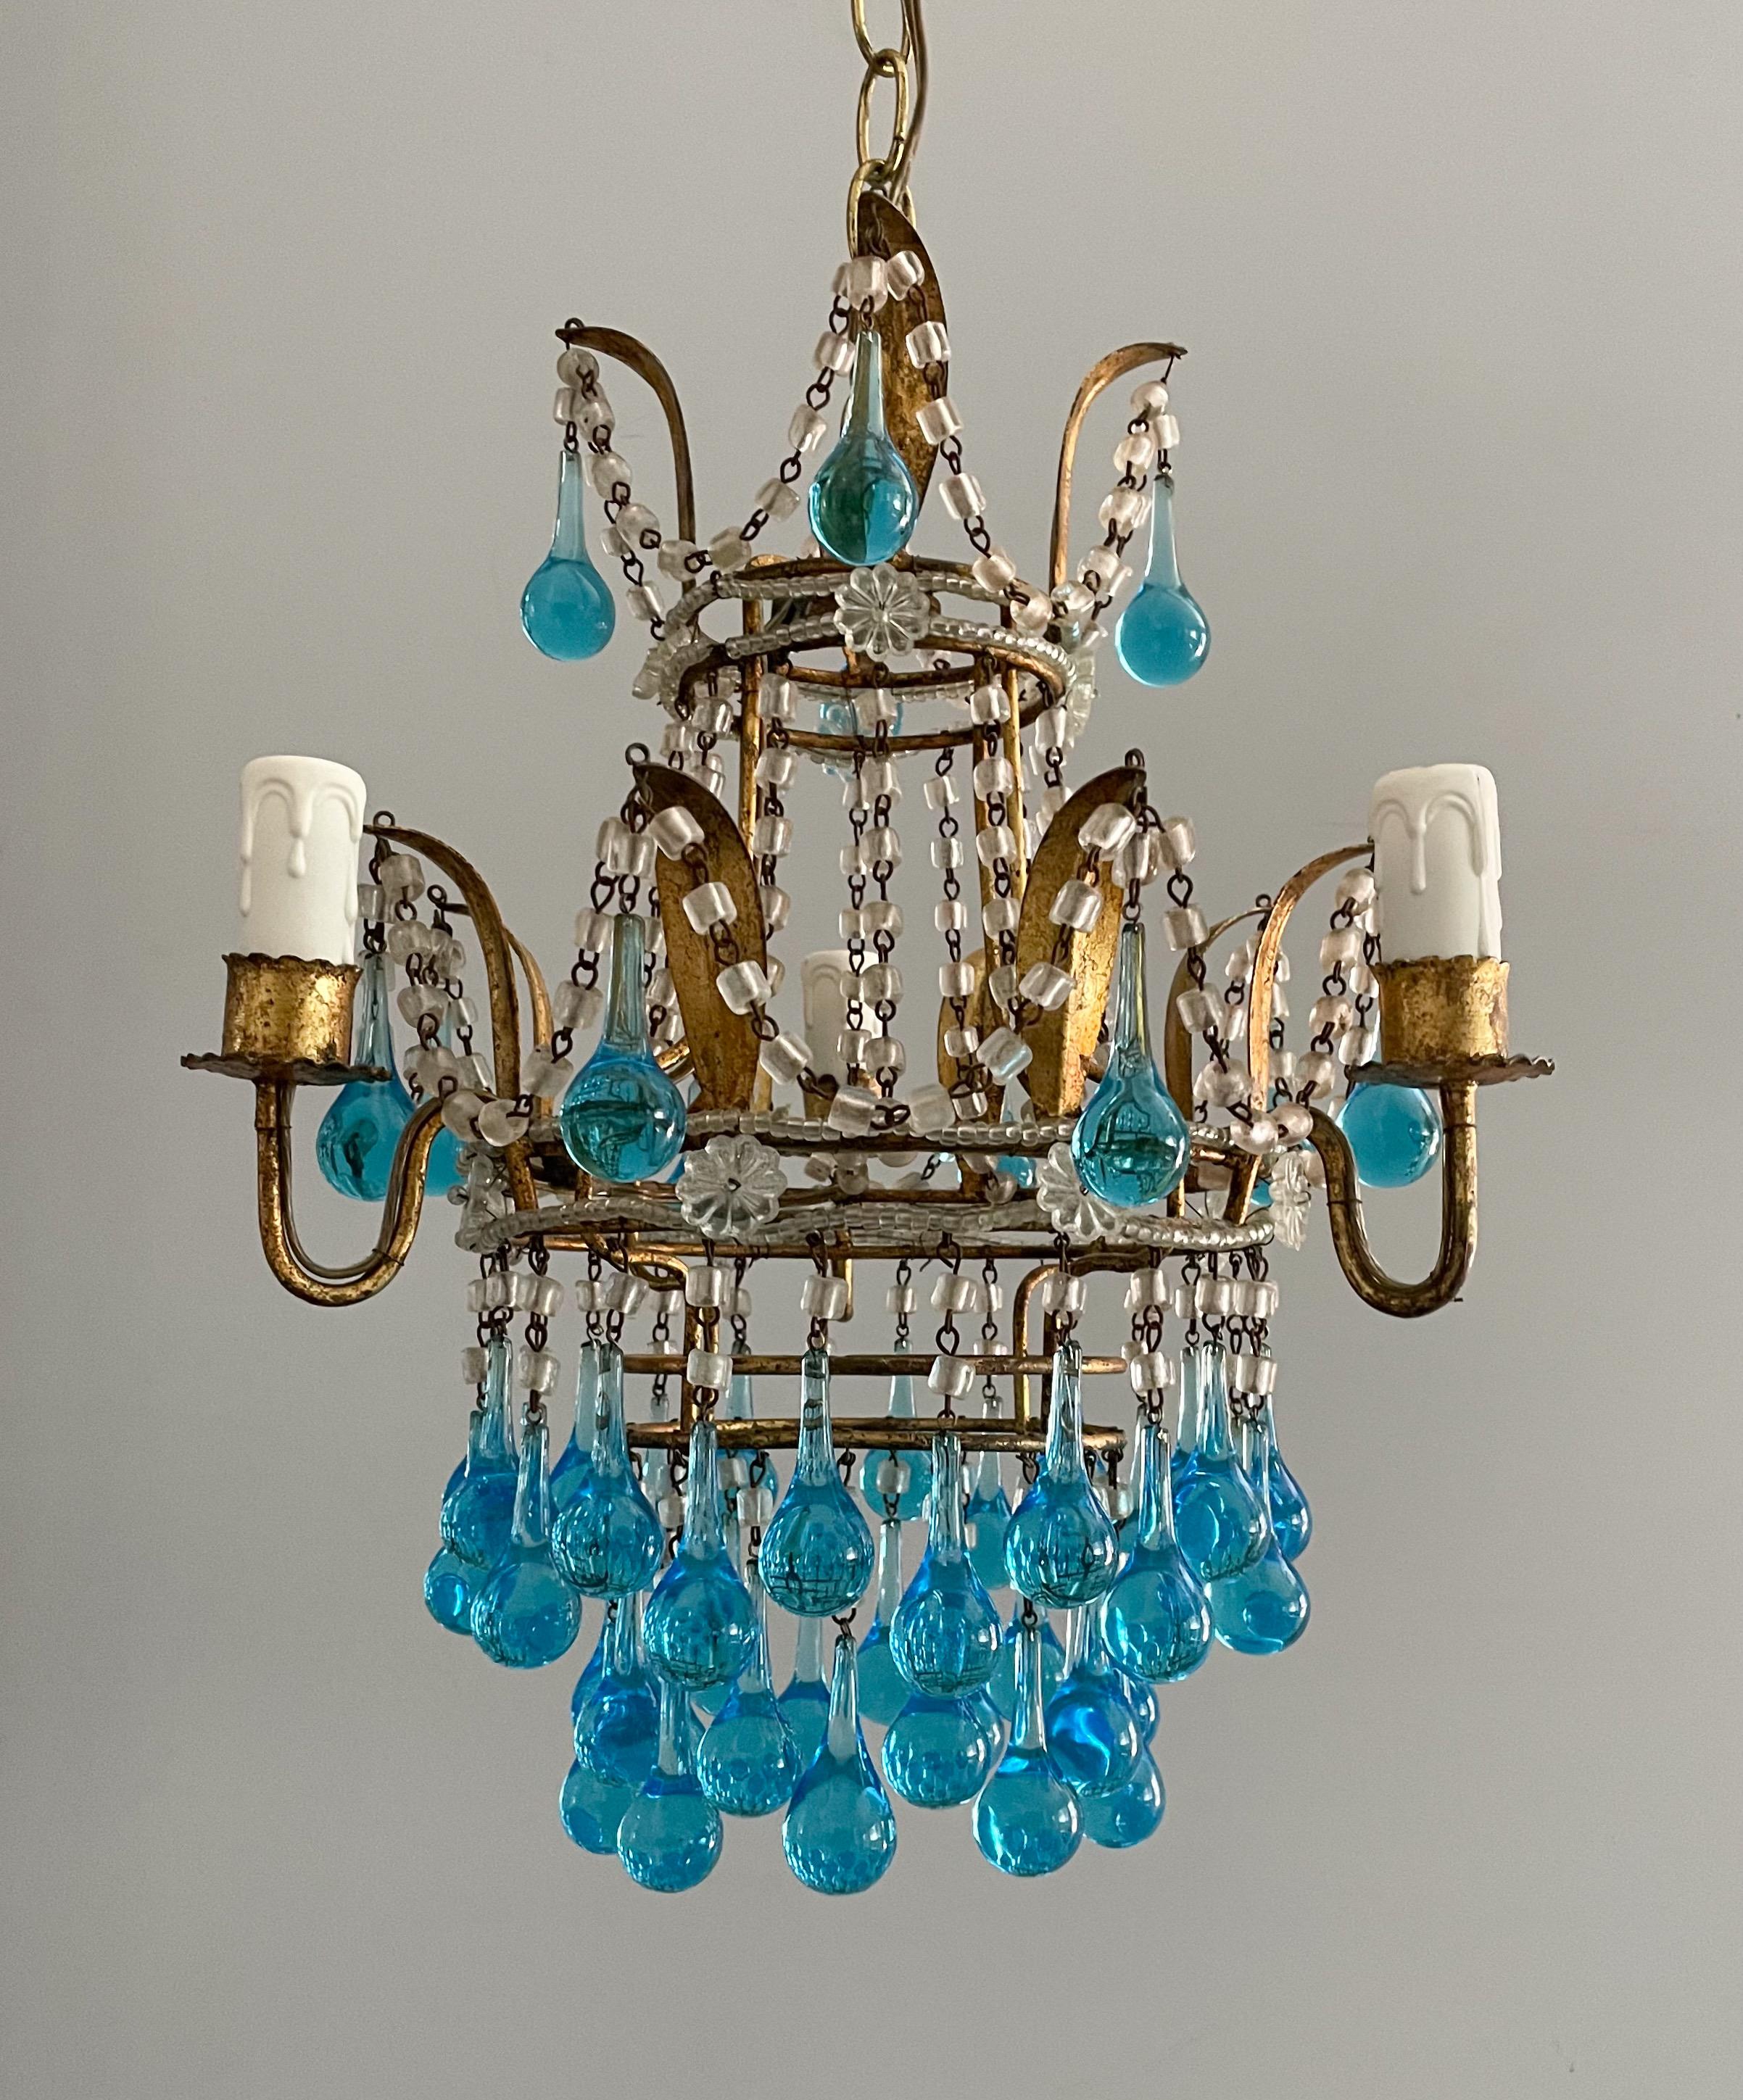 Gorgeous, 1940s Italian gilt-iron and crystal beaded chandelier with Murano glass drops.

The chandelier features a gilded iron frame in the shape of a leafy crown decorated with macaroni glass beads and blue Murano glass ball drops.

The